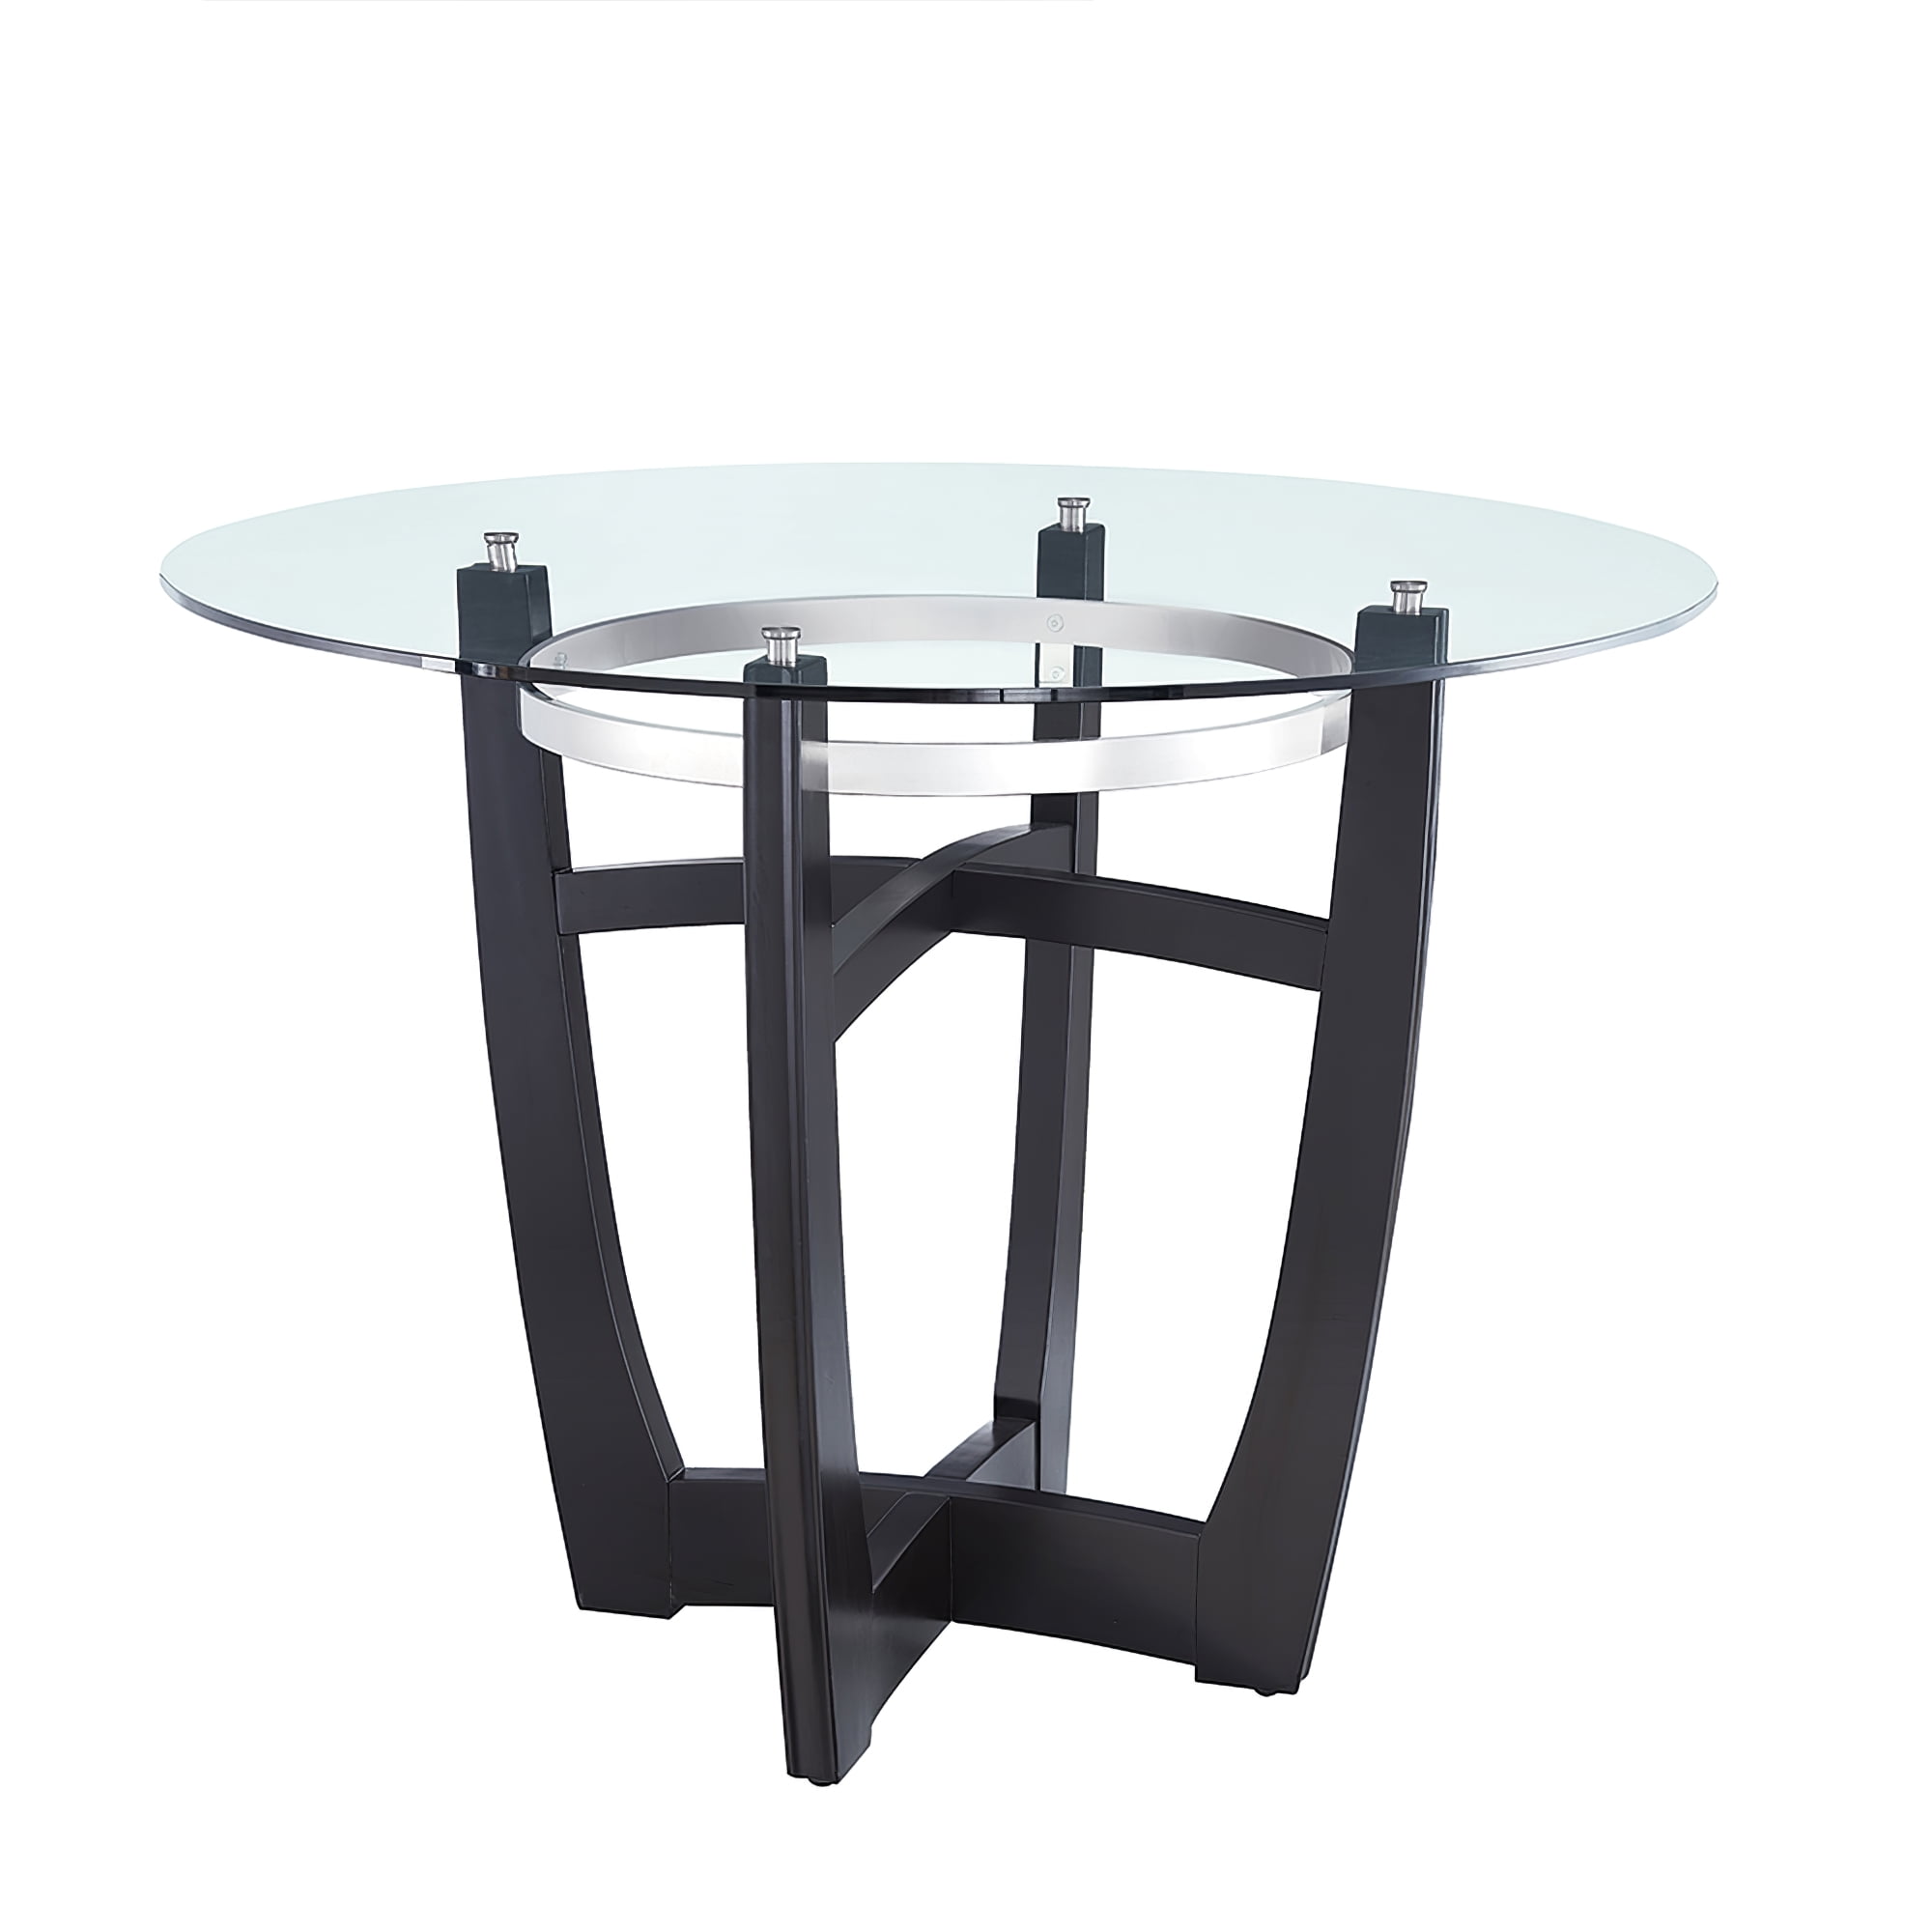 Details about   Solid Wood Table 48" Rround Perimeter Dinning Table 